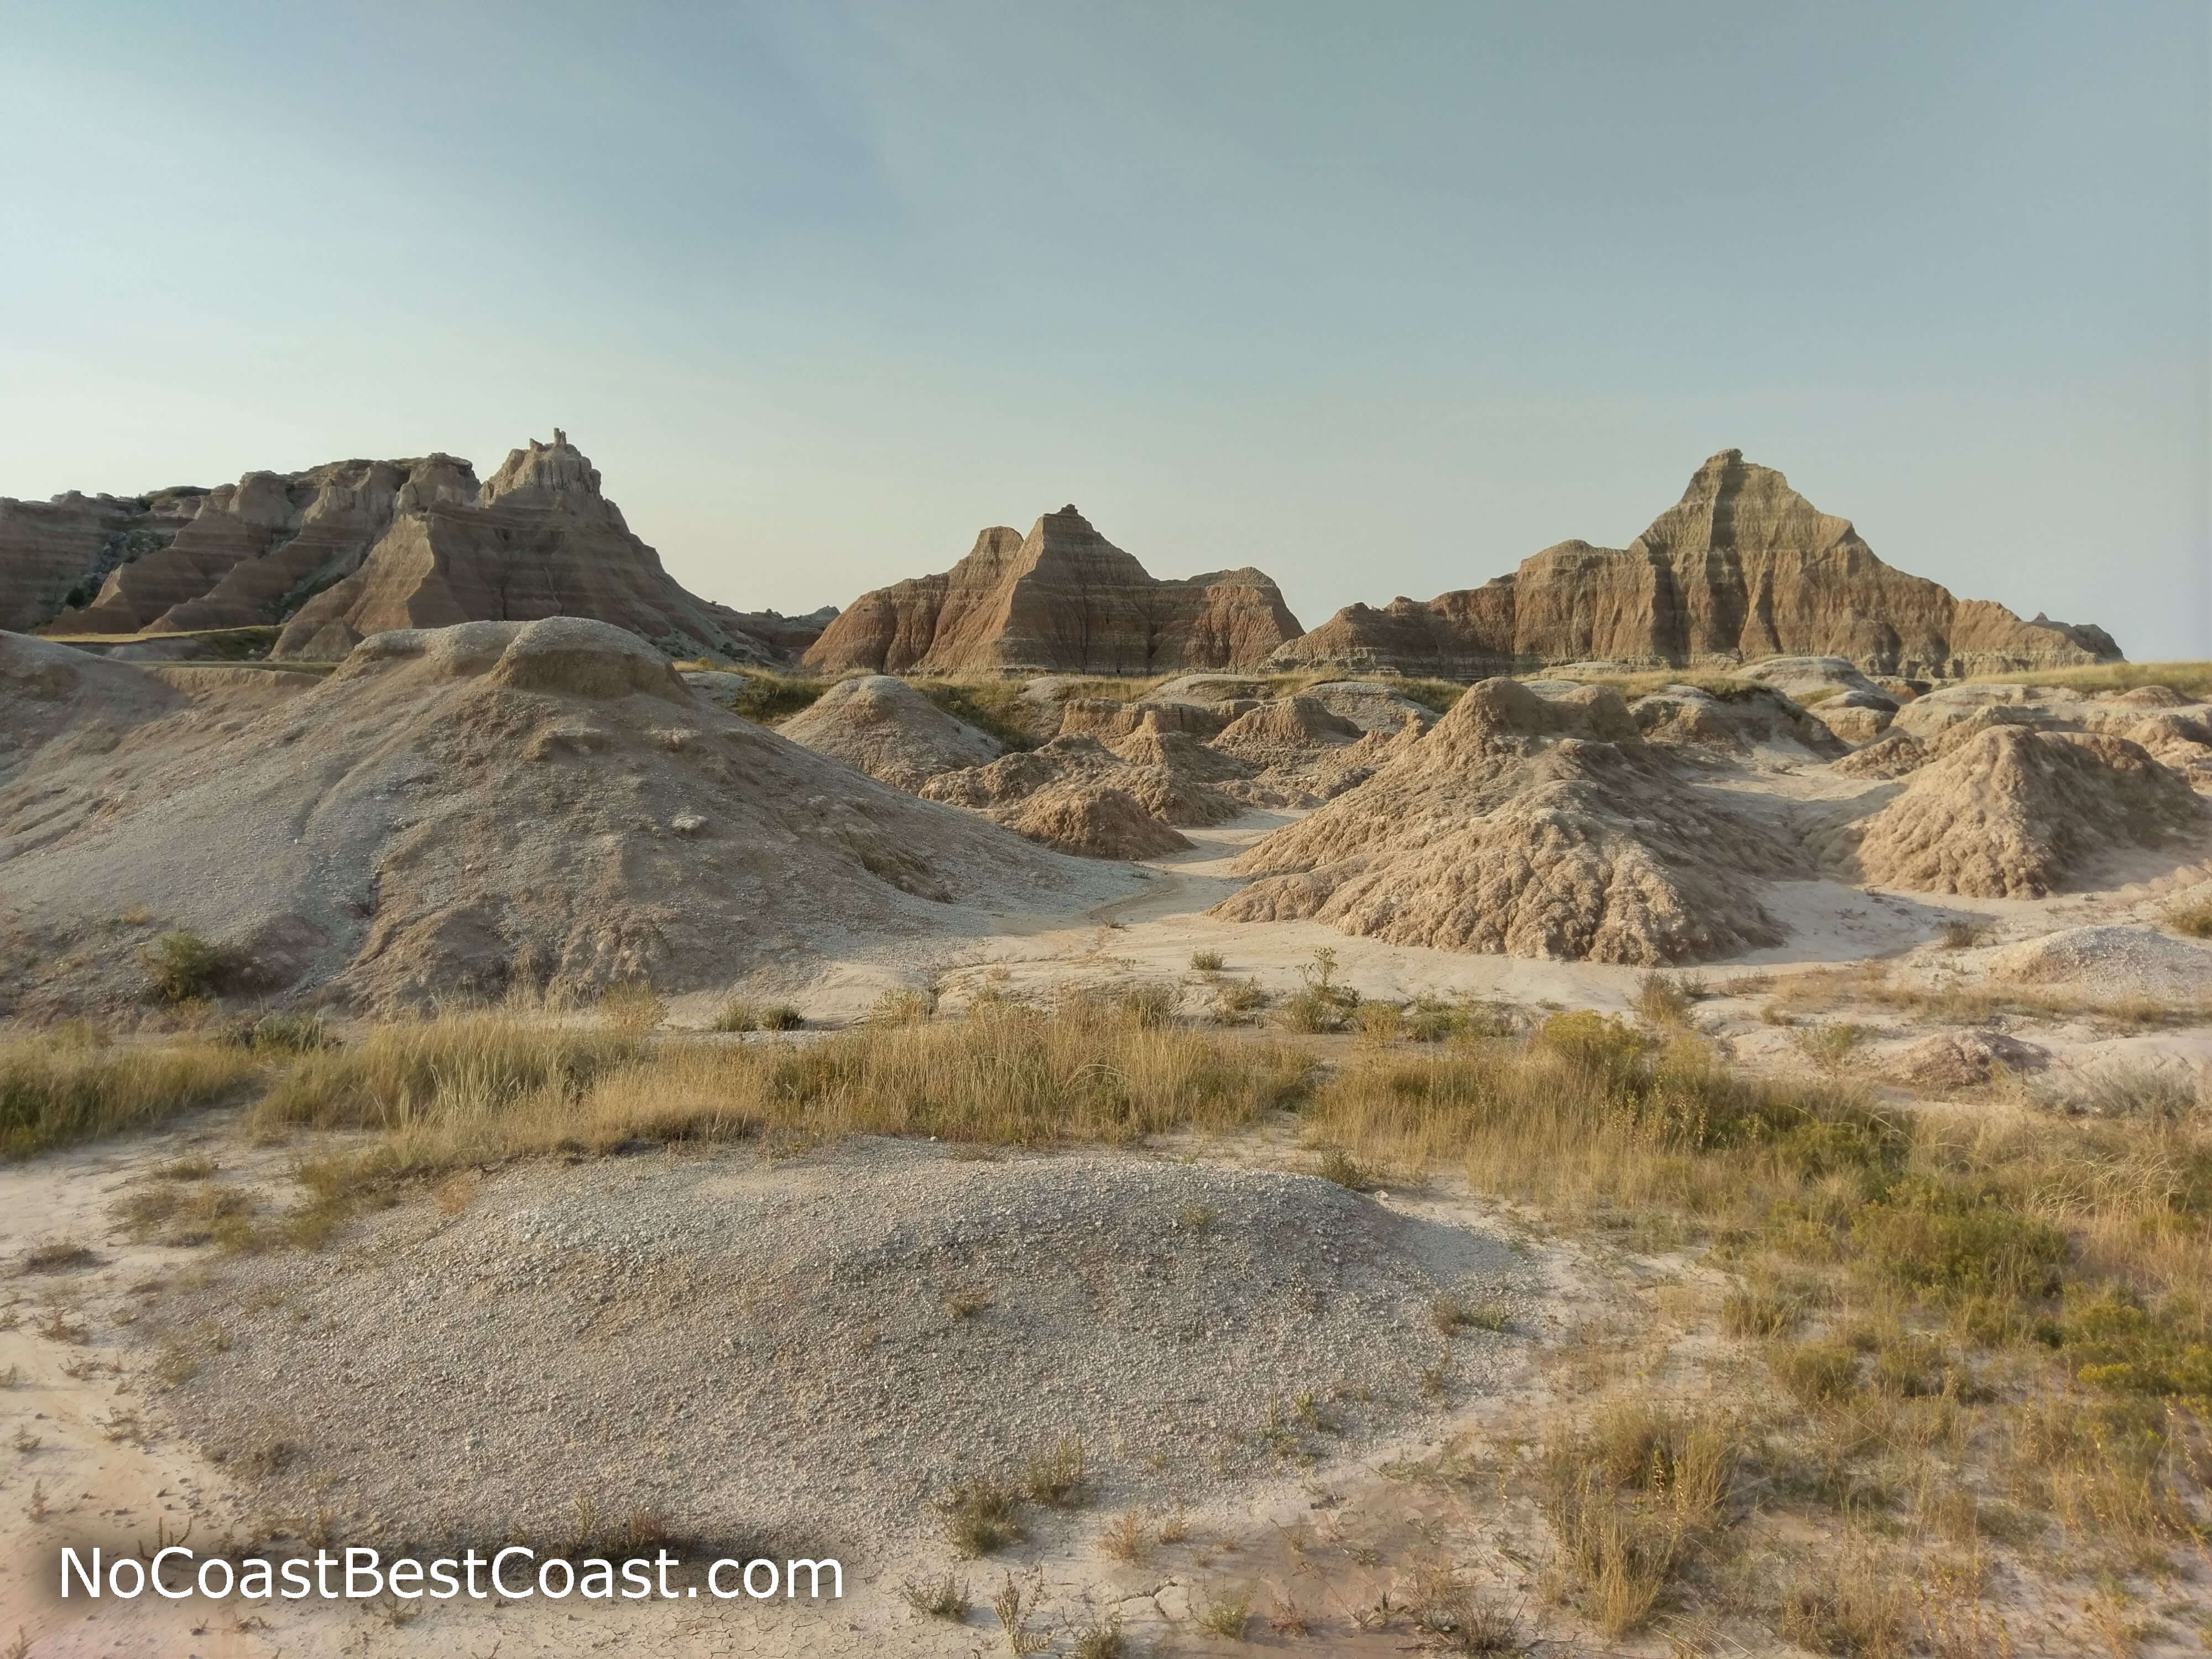 The many colored layers of the badlands formations correspond to different geologic eras